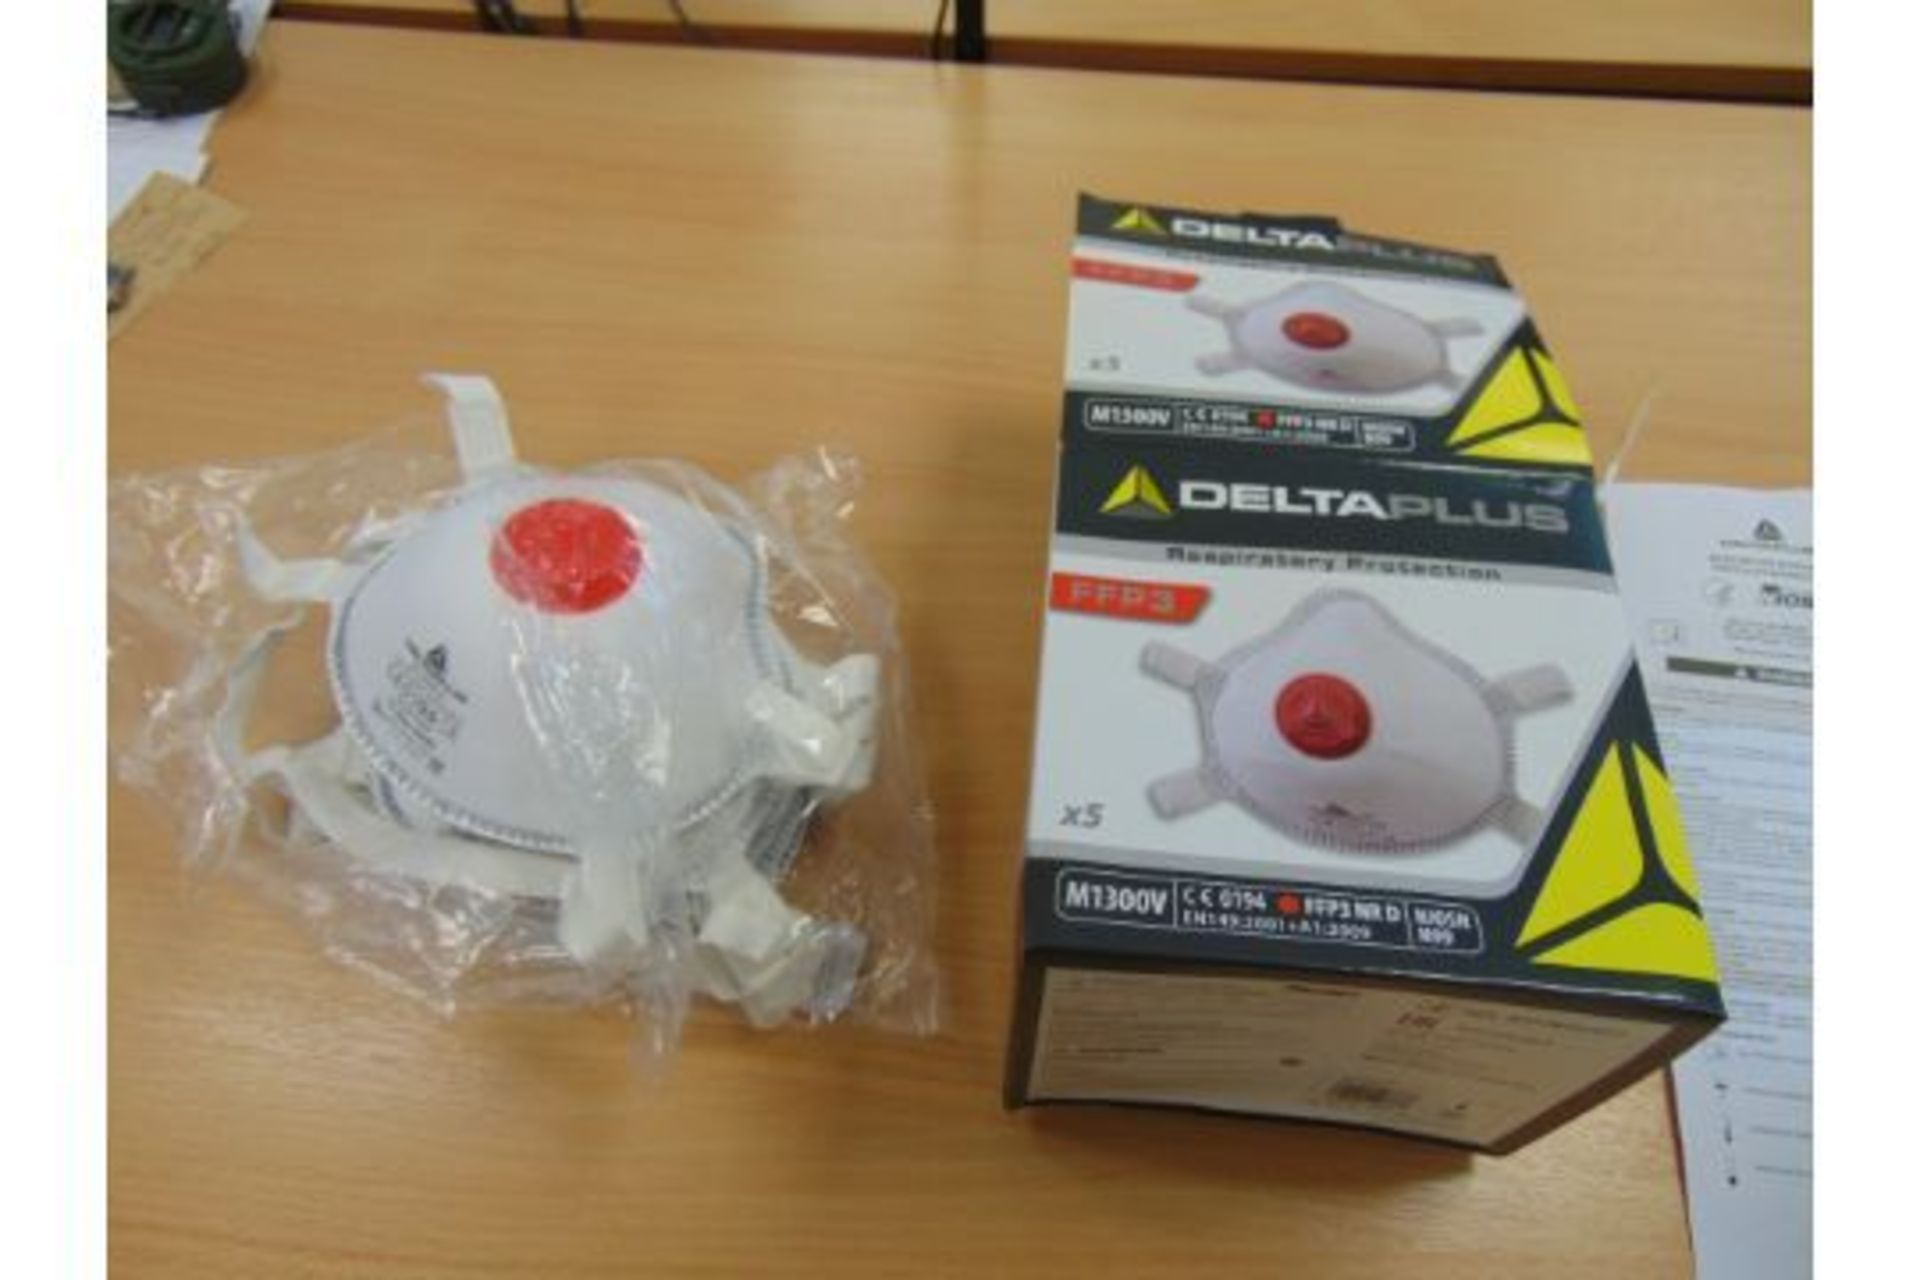 1 PALLET OF 1050 NEW UNUSED DELTA PLUS HIGH QUALITY DUST RESPIRATOR MASKS CE MARKED WITH VALVE - Image 2 of 8